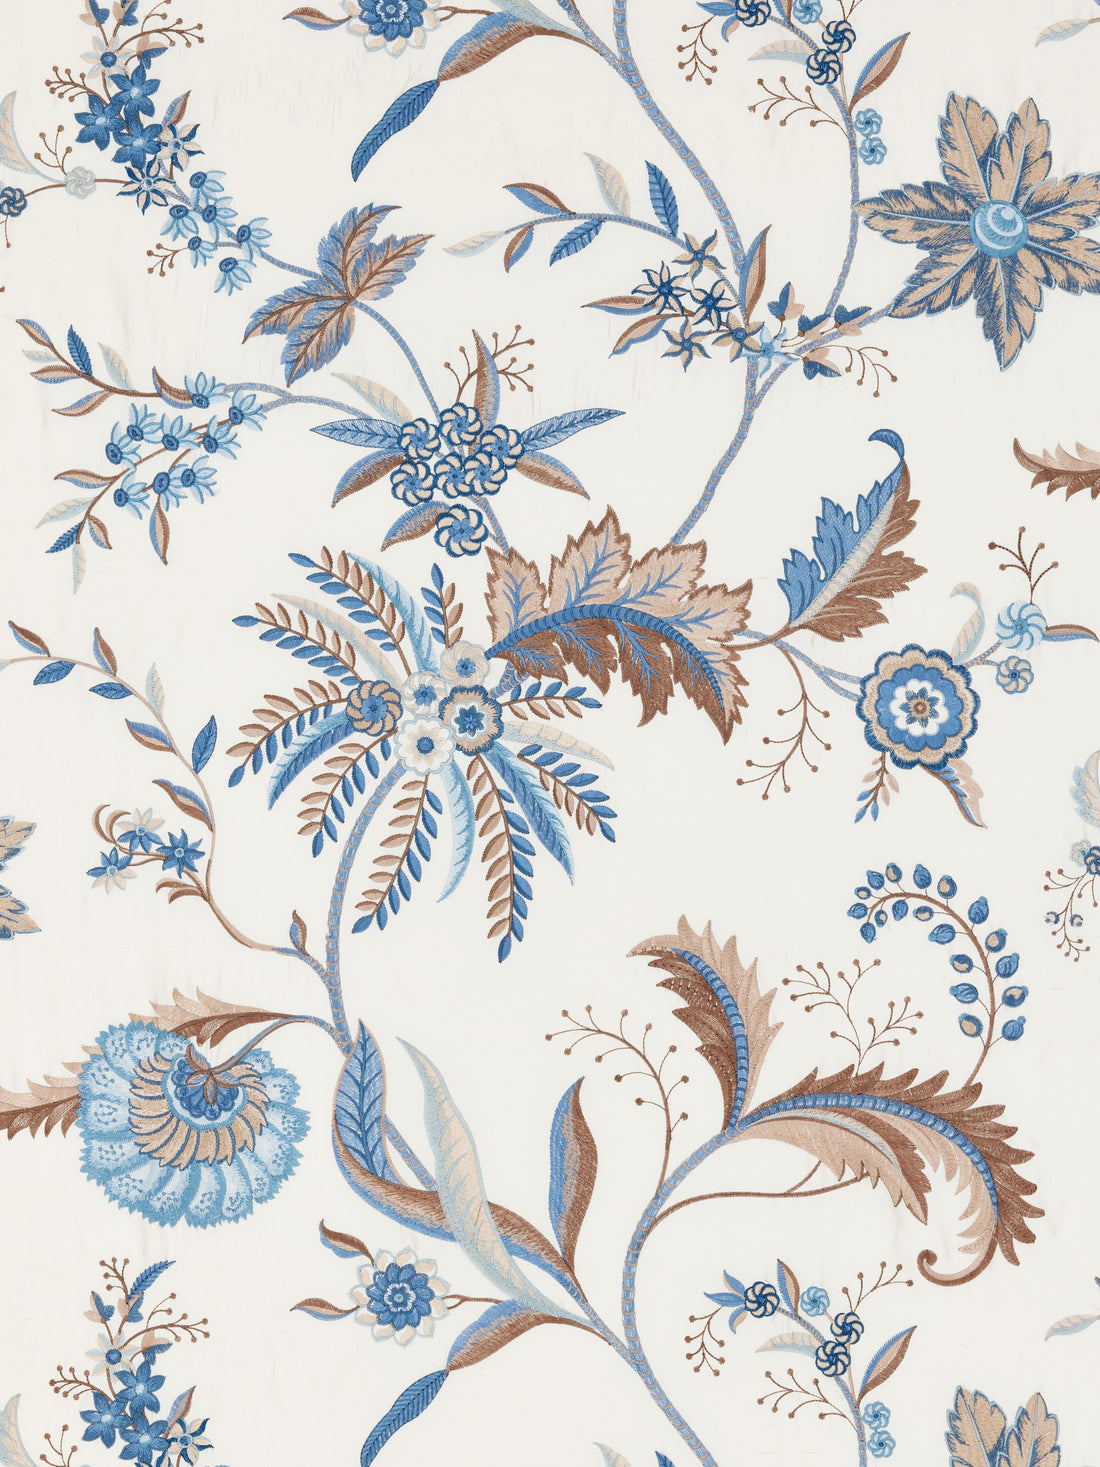 Seraphine Embroidered Silk fabric in sky and stone color - pattern number SC 000227325 - by Scalamandre in the Scalamandre Fabrics Book 1 collection